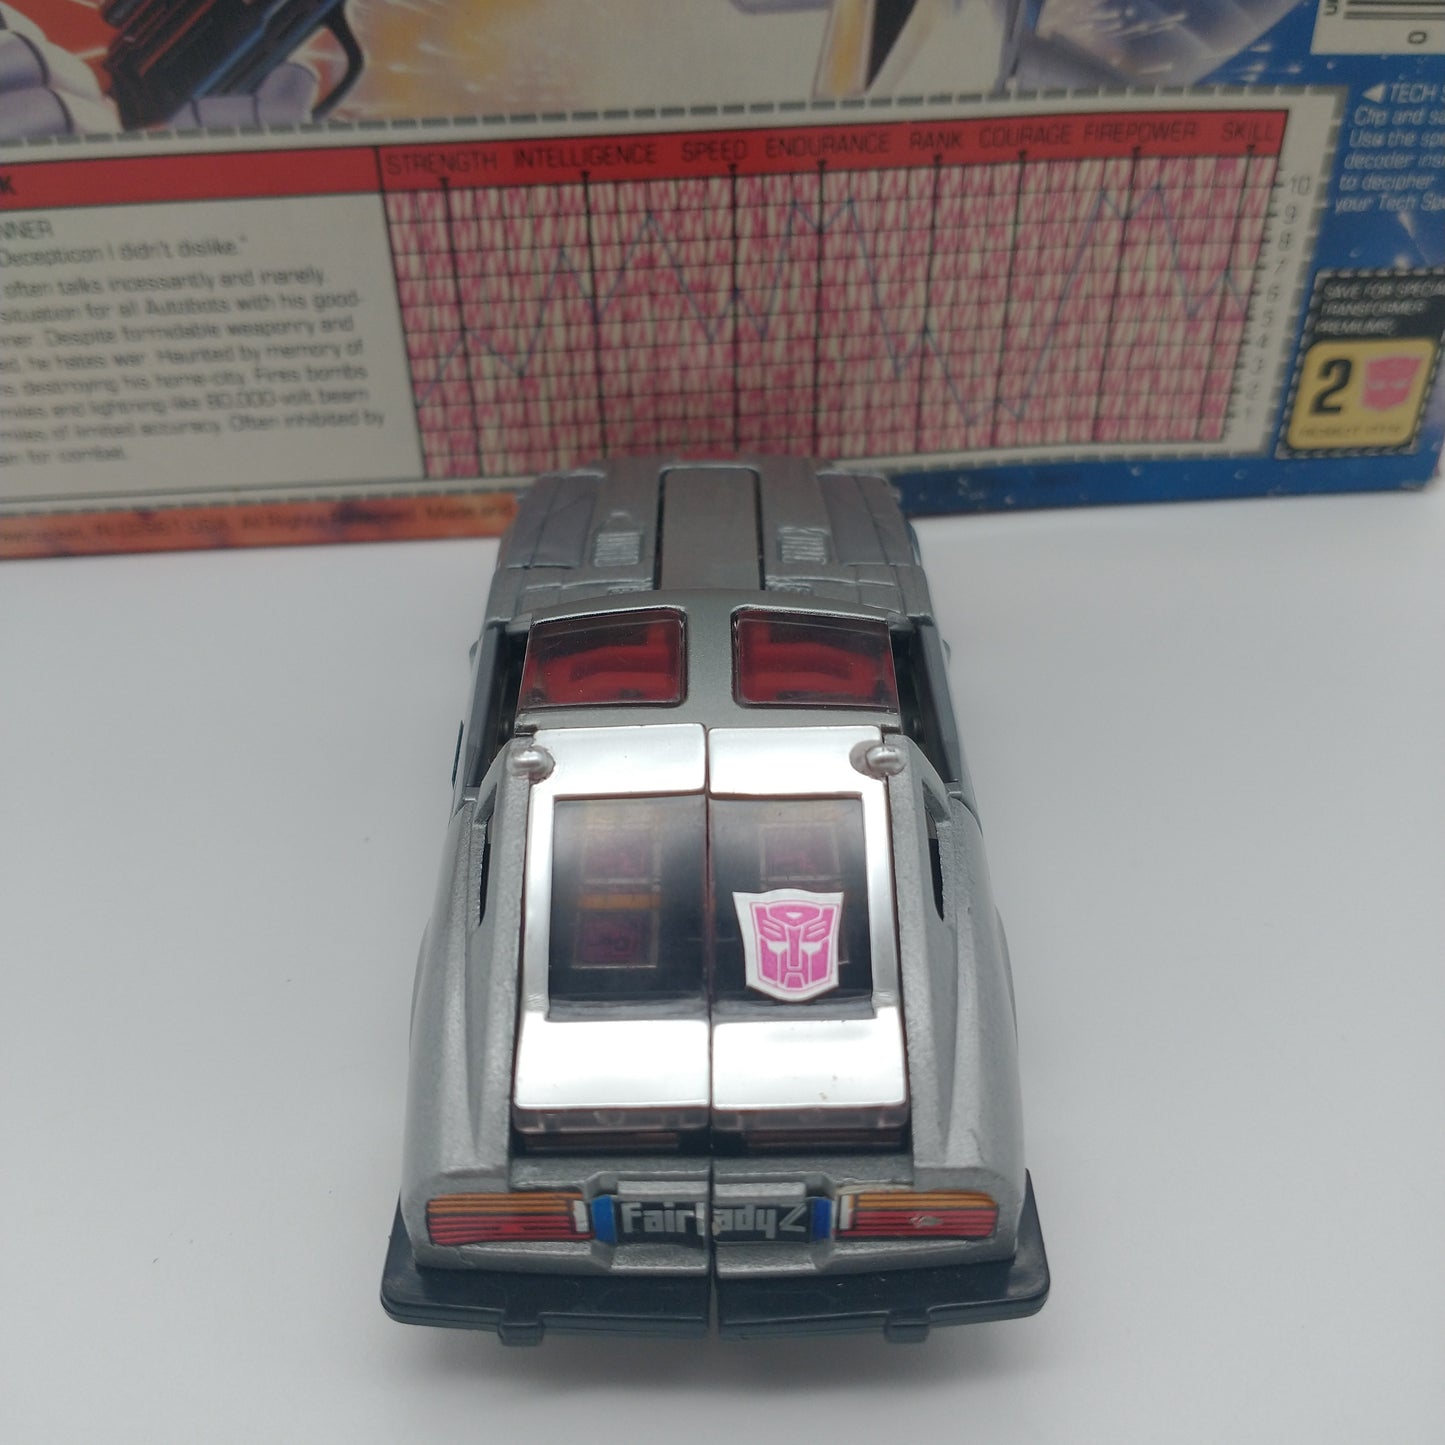 The back side of the toy in car form